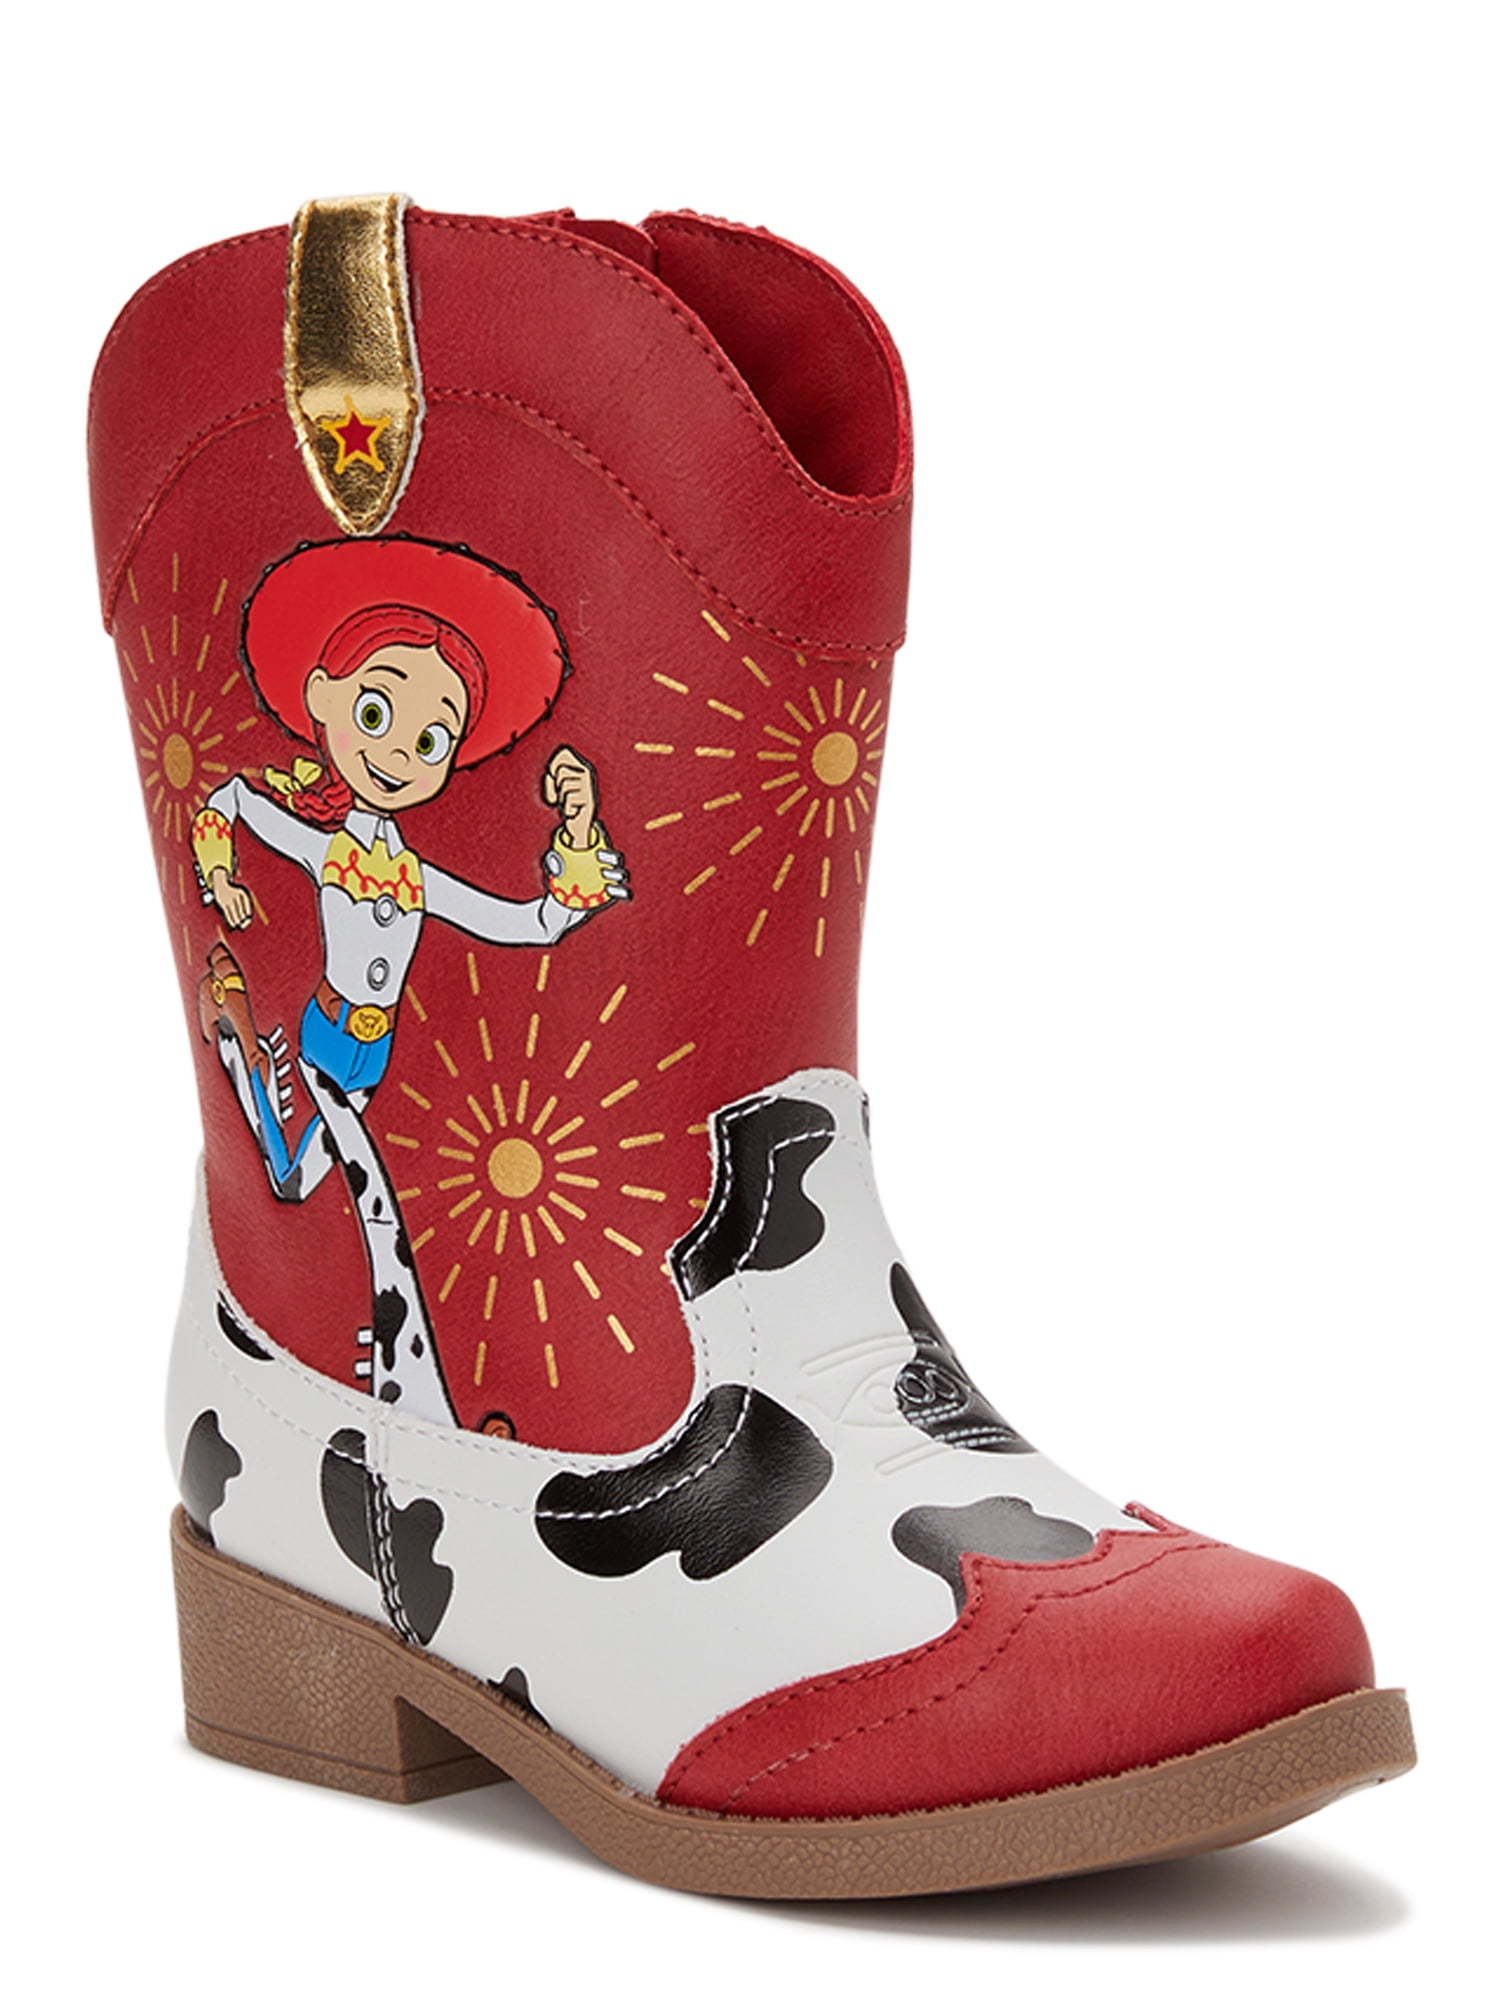 Disney Toy Story Jessie Toddler Girls Cowgirl Boots, Sizes 7-12 | lupon ...